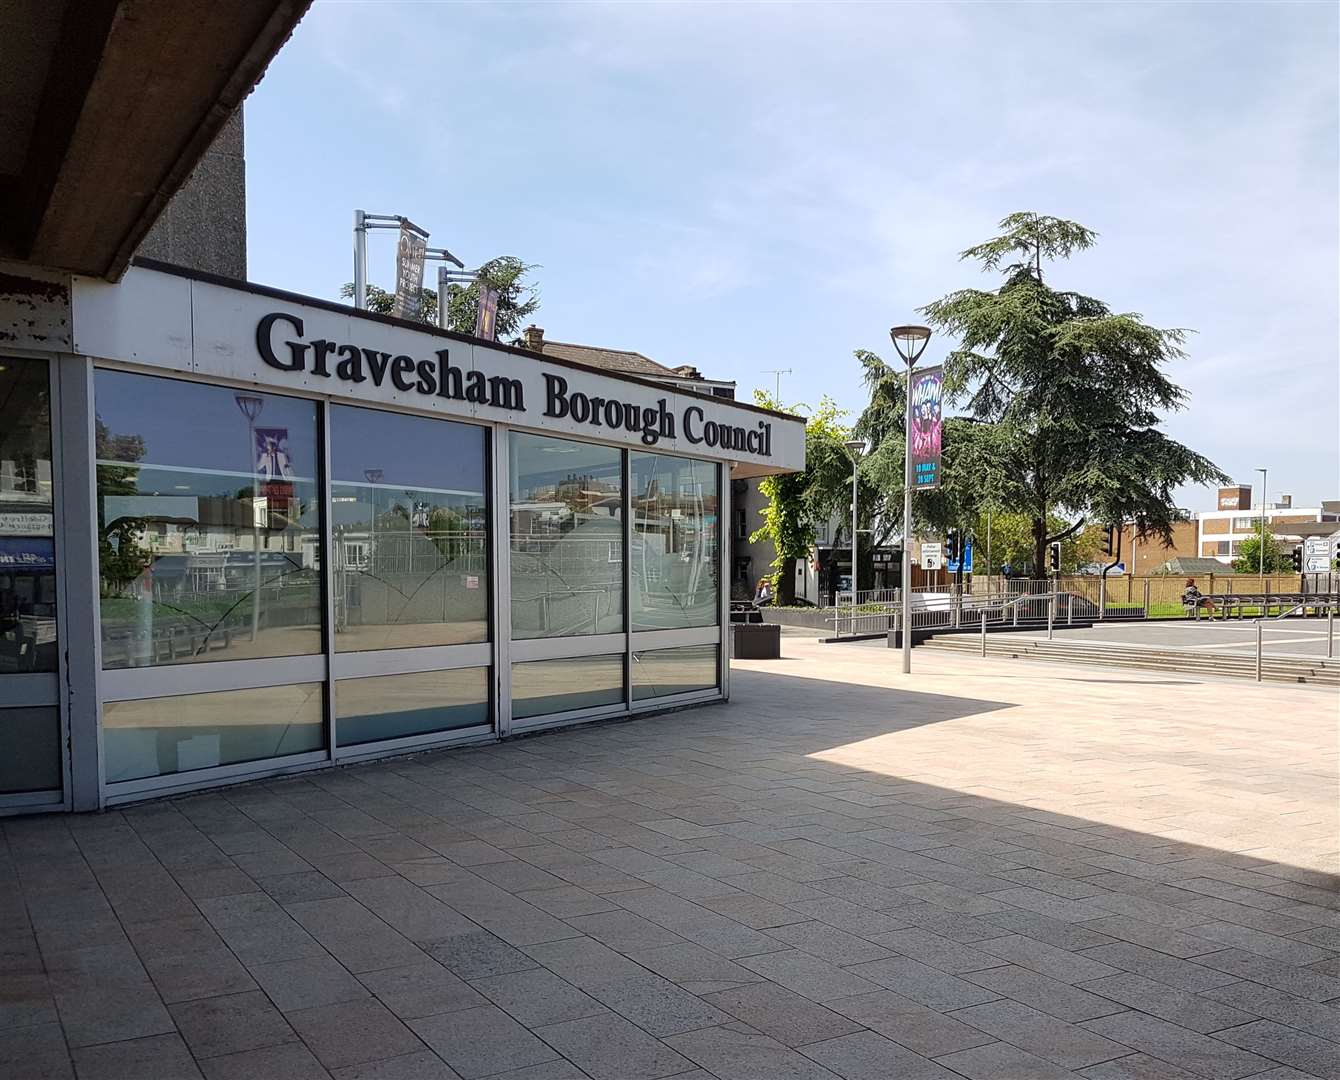 The awards were held at The Woodville based at the Gravesham Civic Centre.